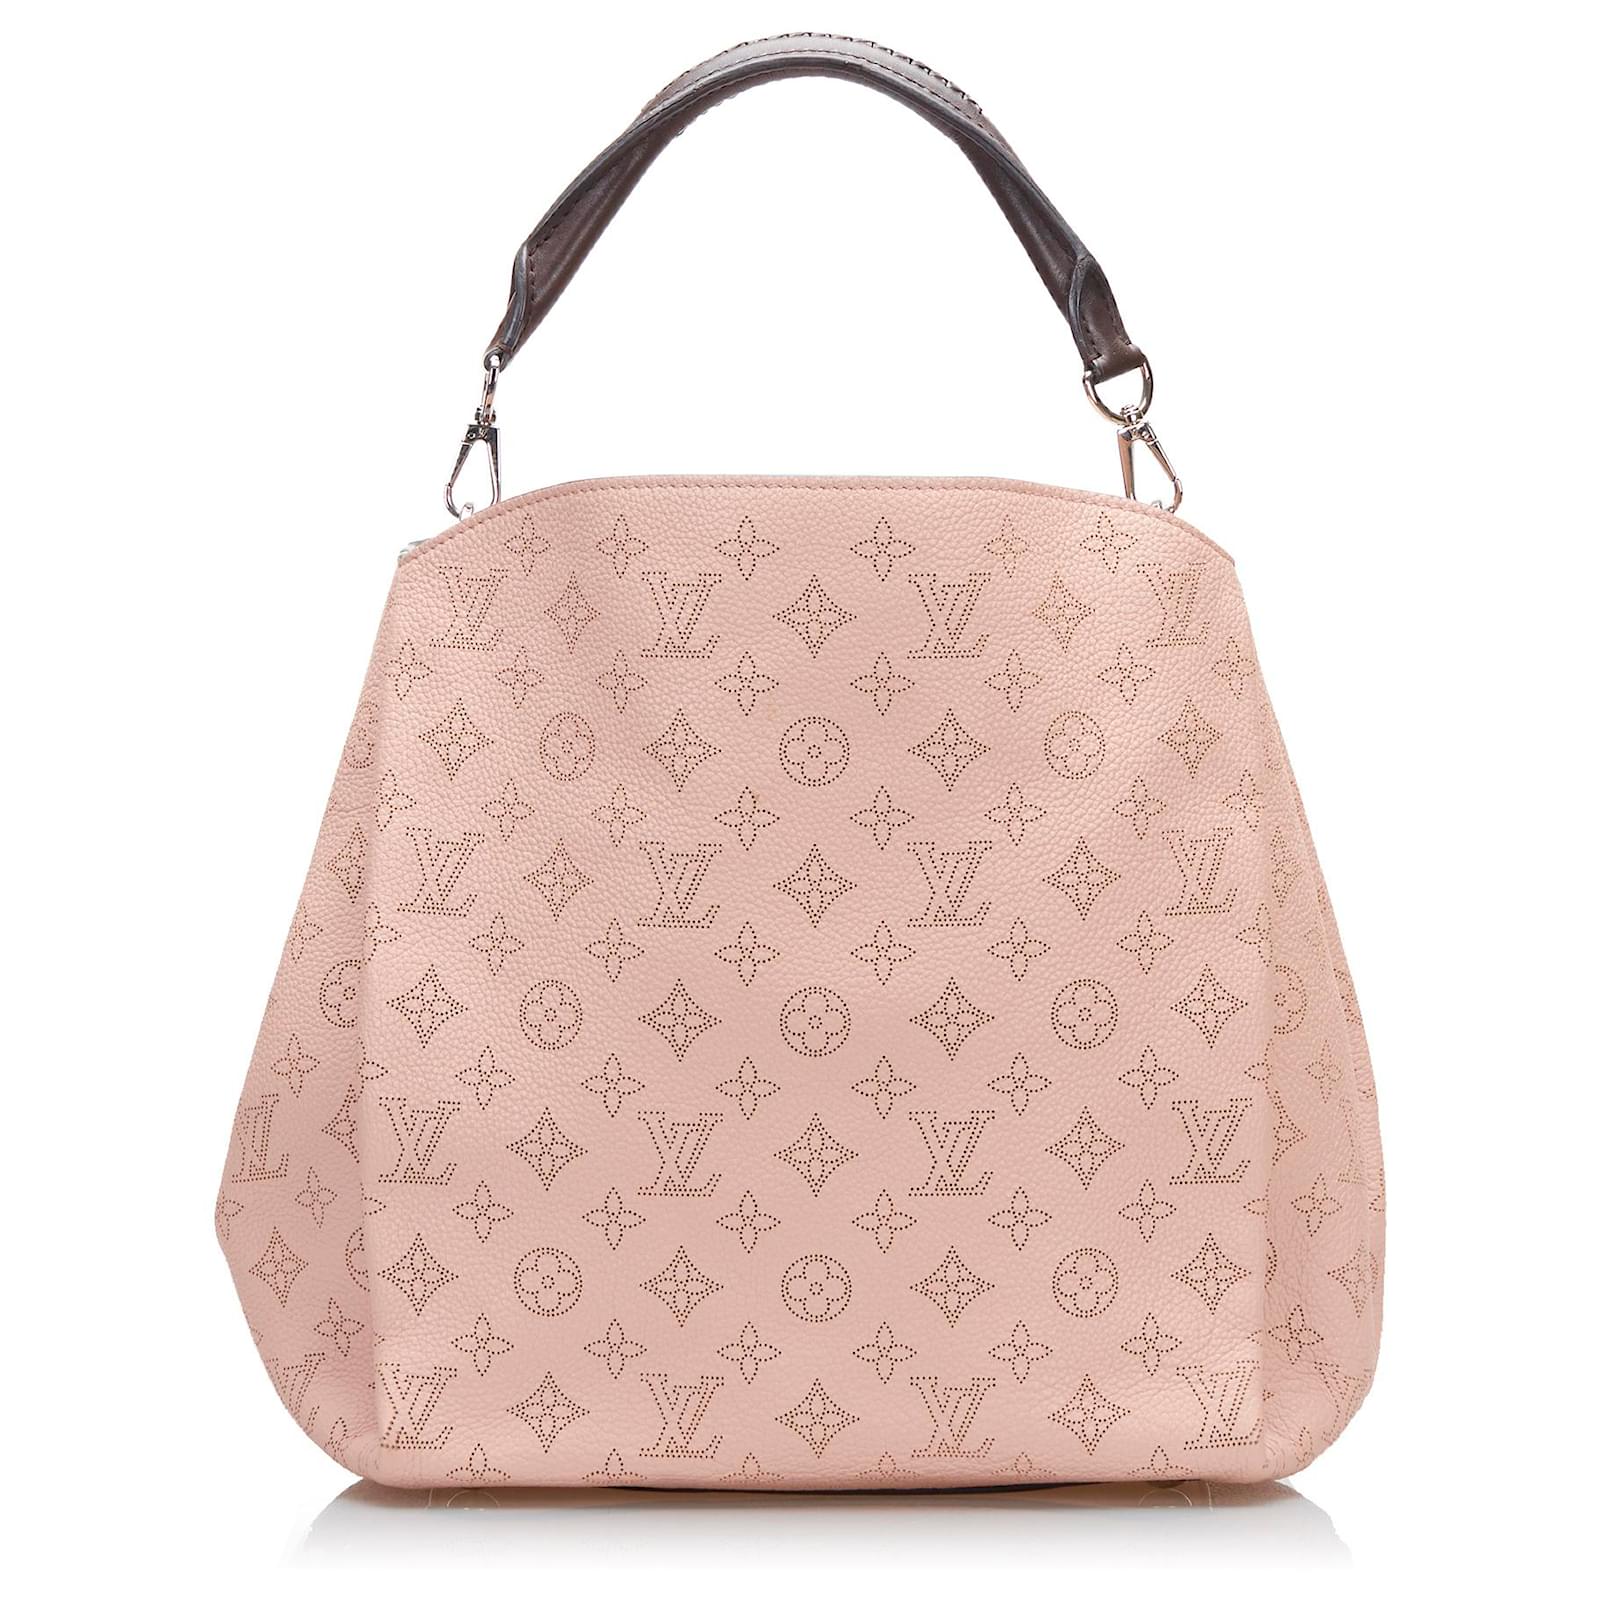 Louis Vuitton Pink Mahina Babylone PM Leather Pony-style calfskin